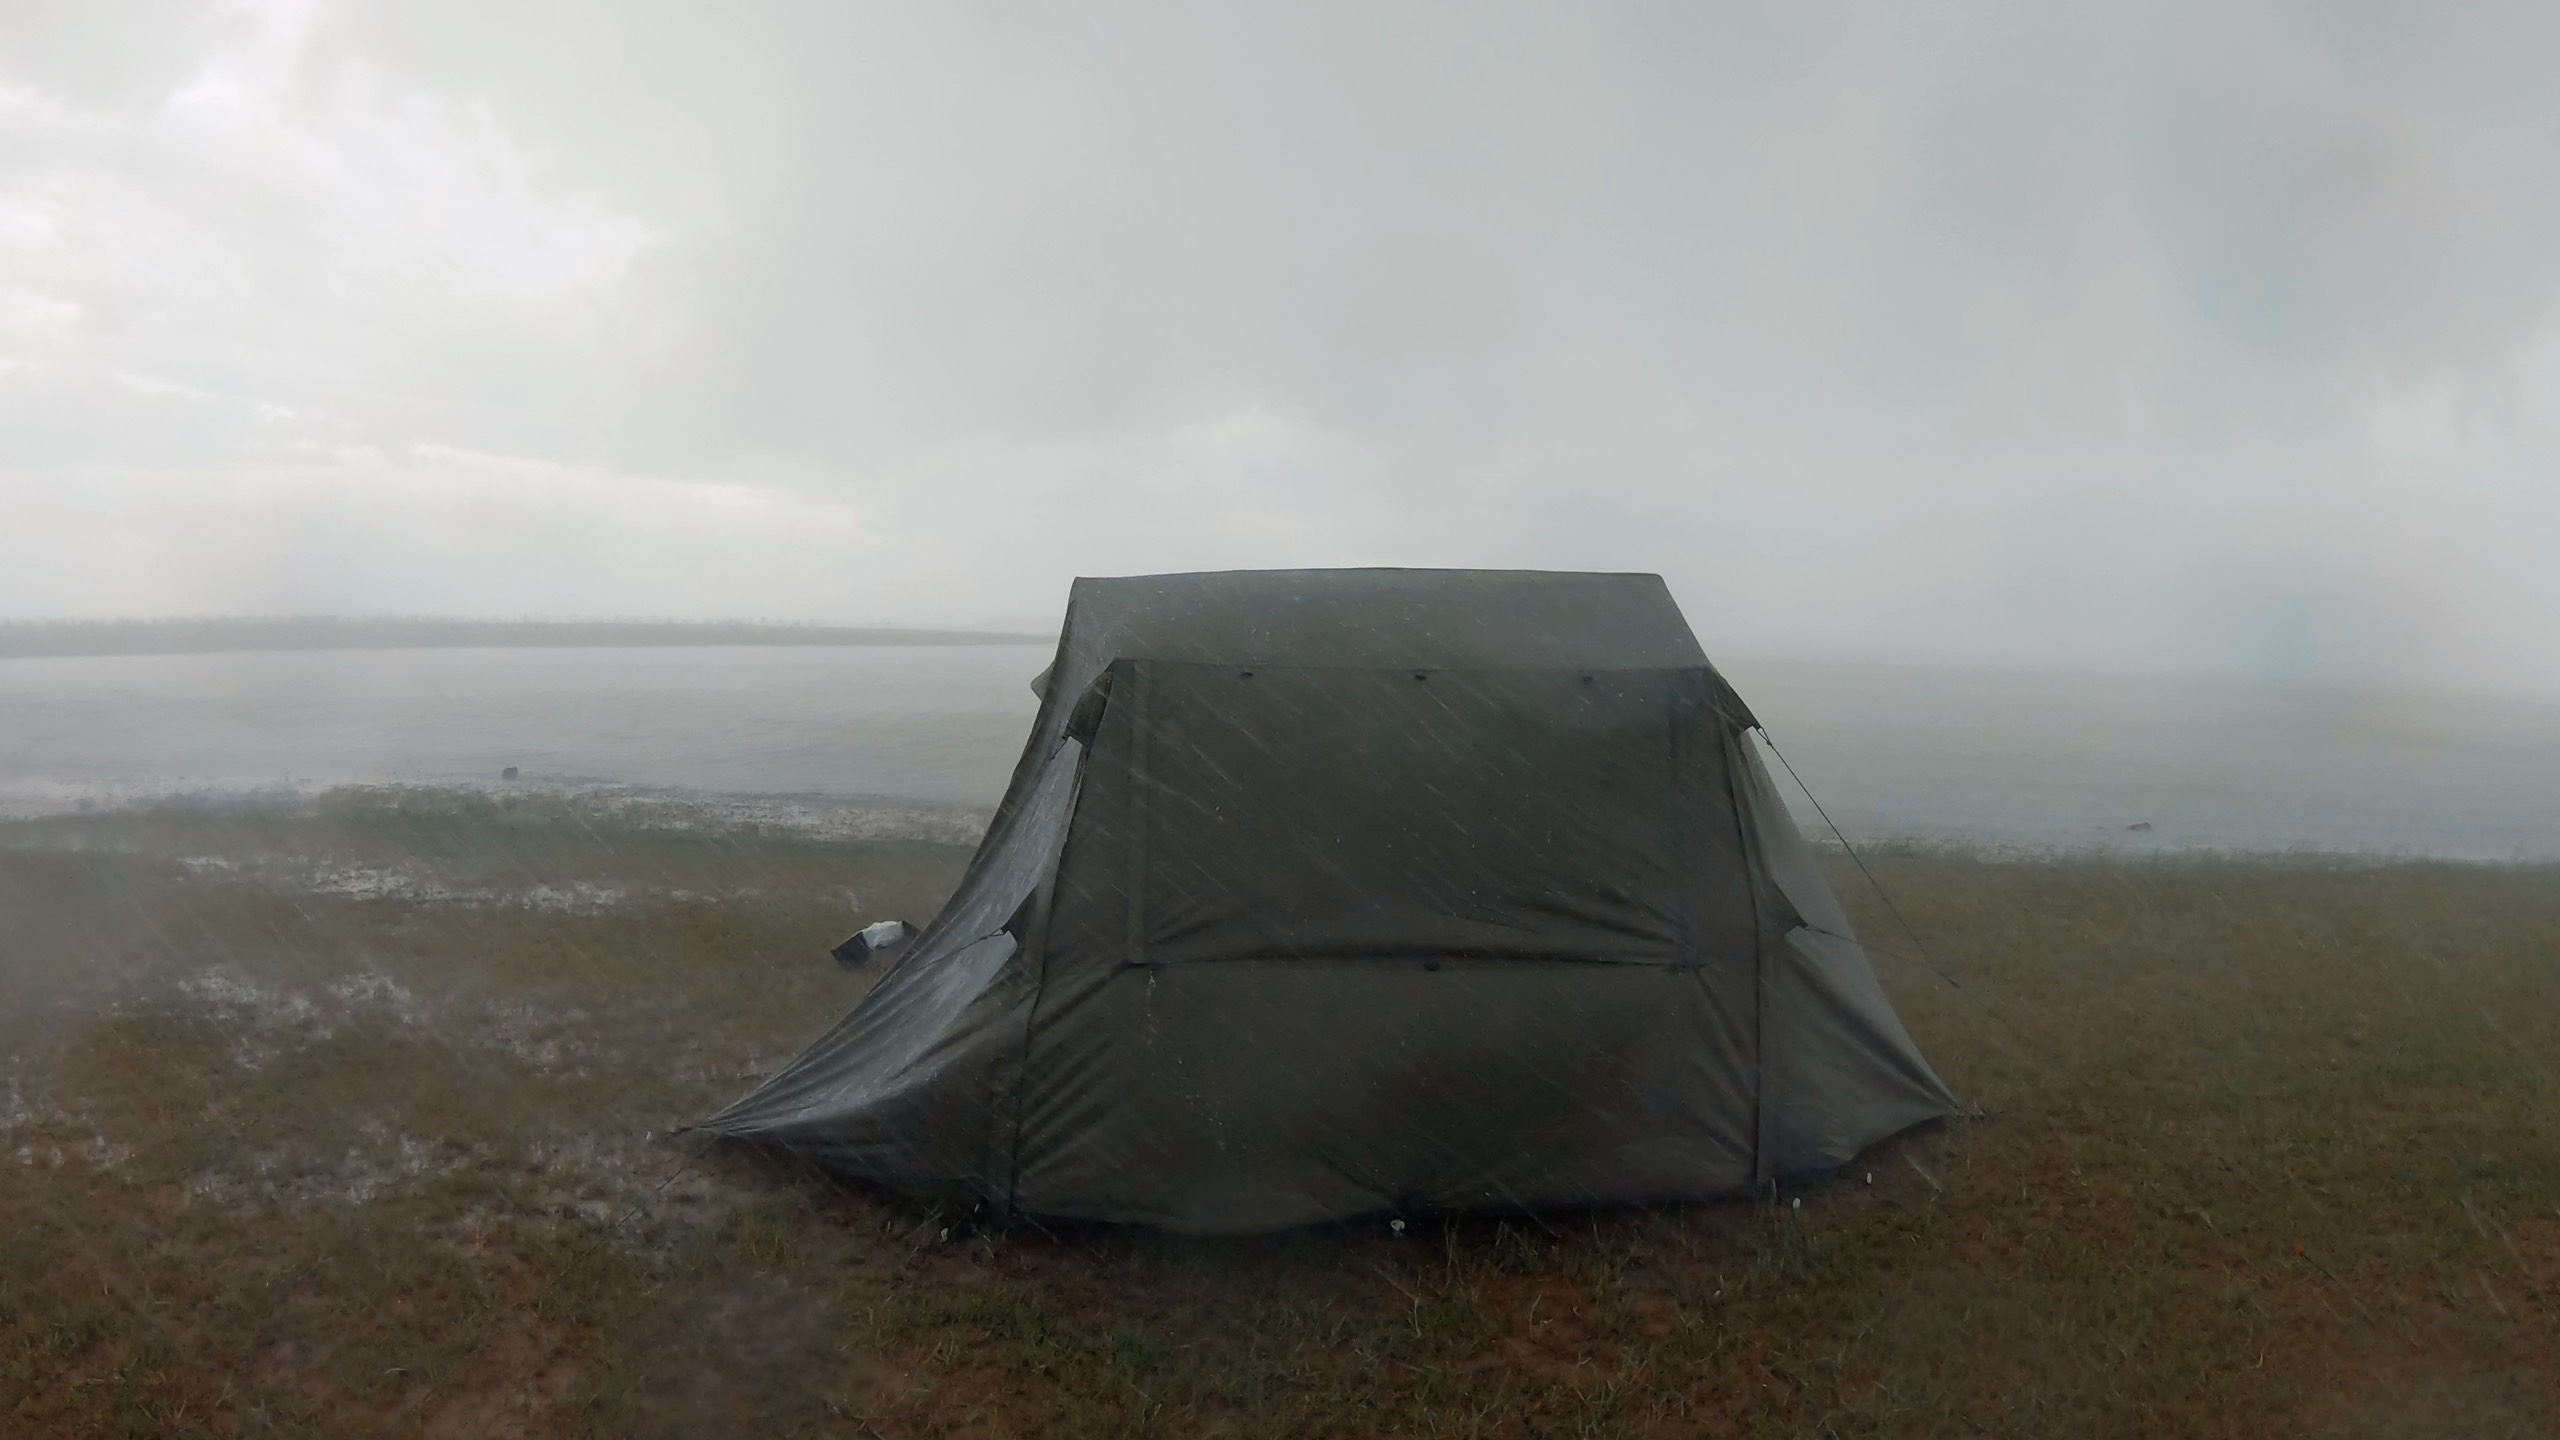 A supplied photo shows Thong camping under the rain.